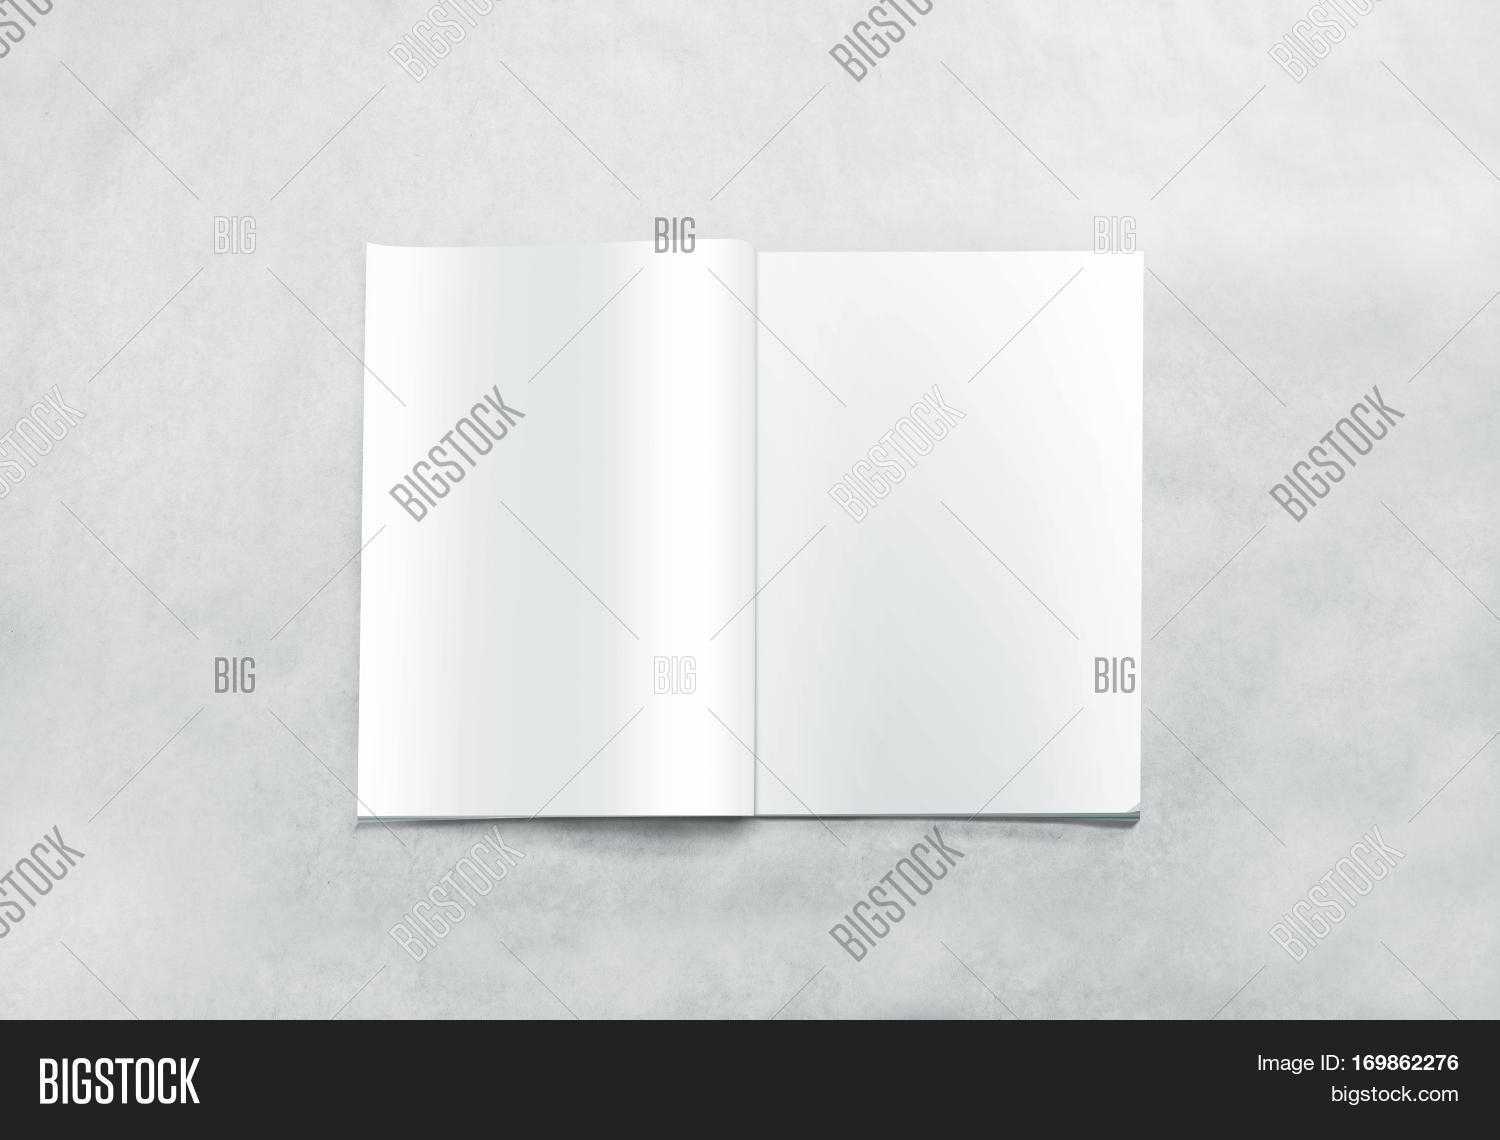 Opened Blank Magazine Image & Photo (Free Trial) | Bigstock For Blank Magazine Spread Template